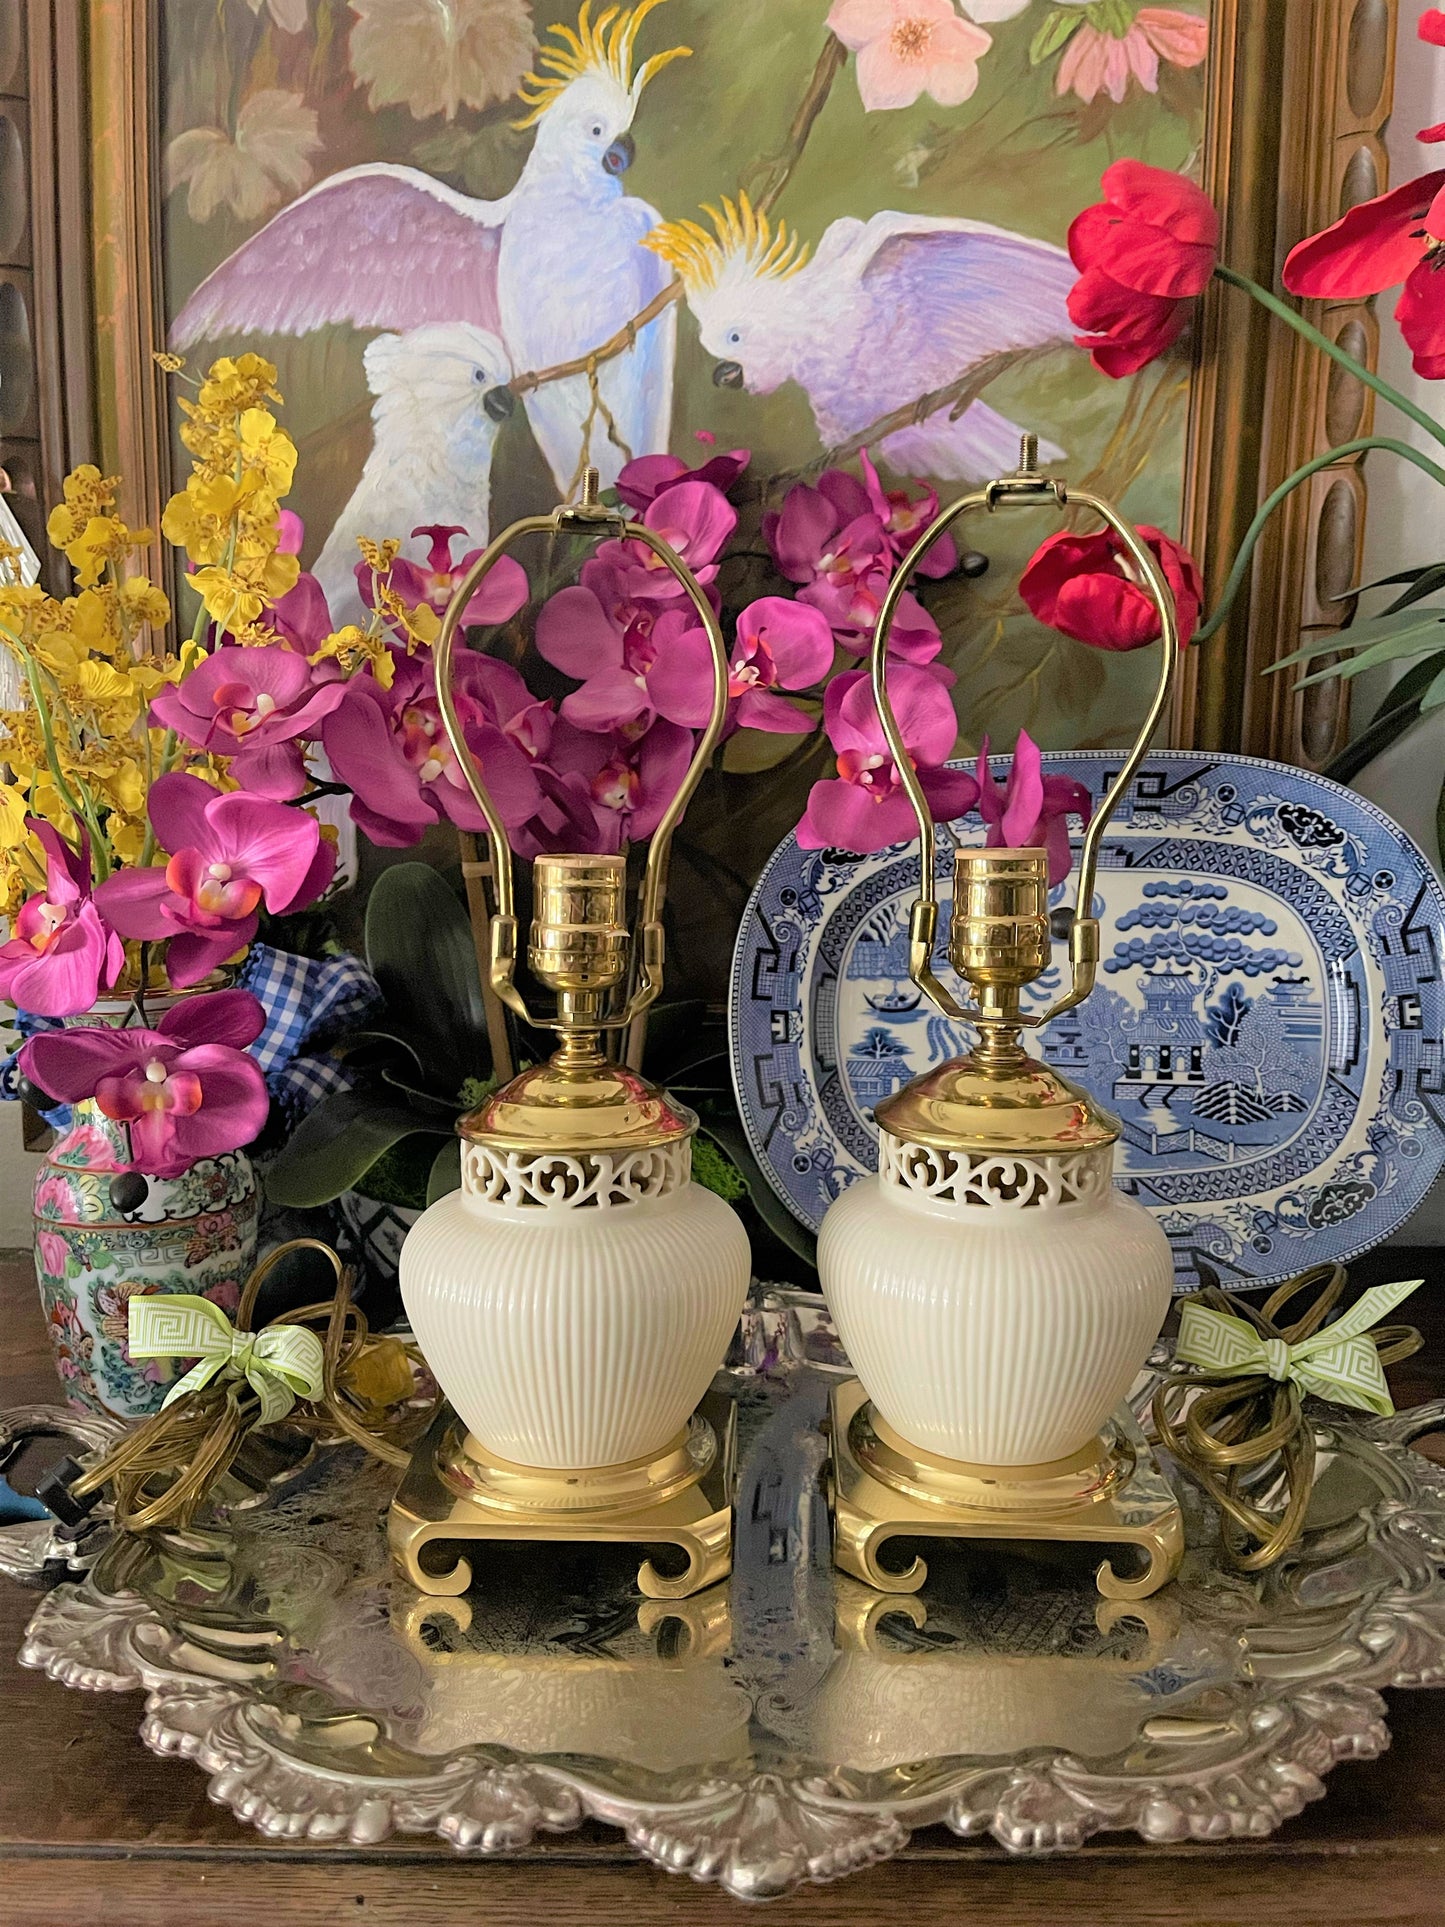 Vintage Lenox Quoizel Lamps, Ivory and Brass Chinoiserie Ming Base Lenox Lamps, Reticulated